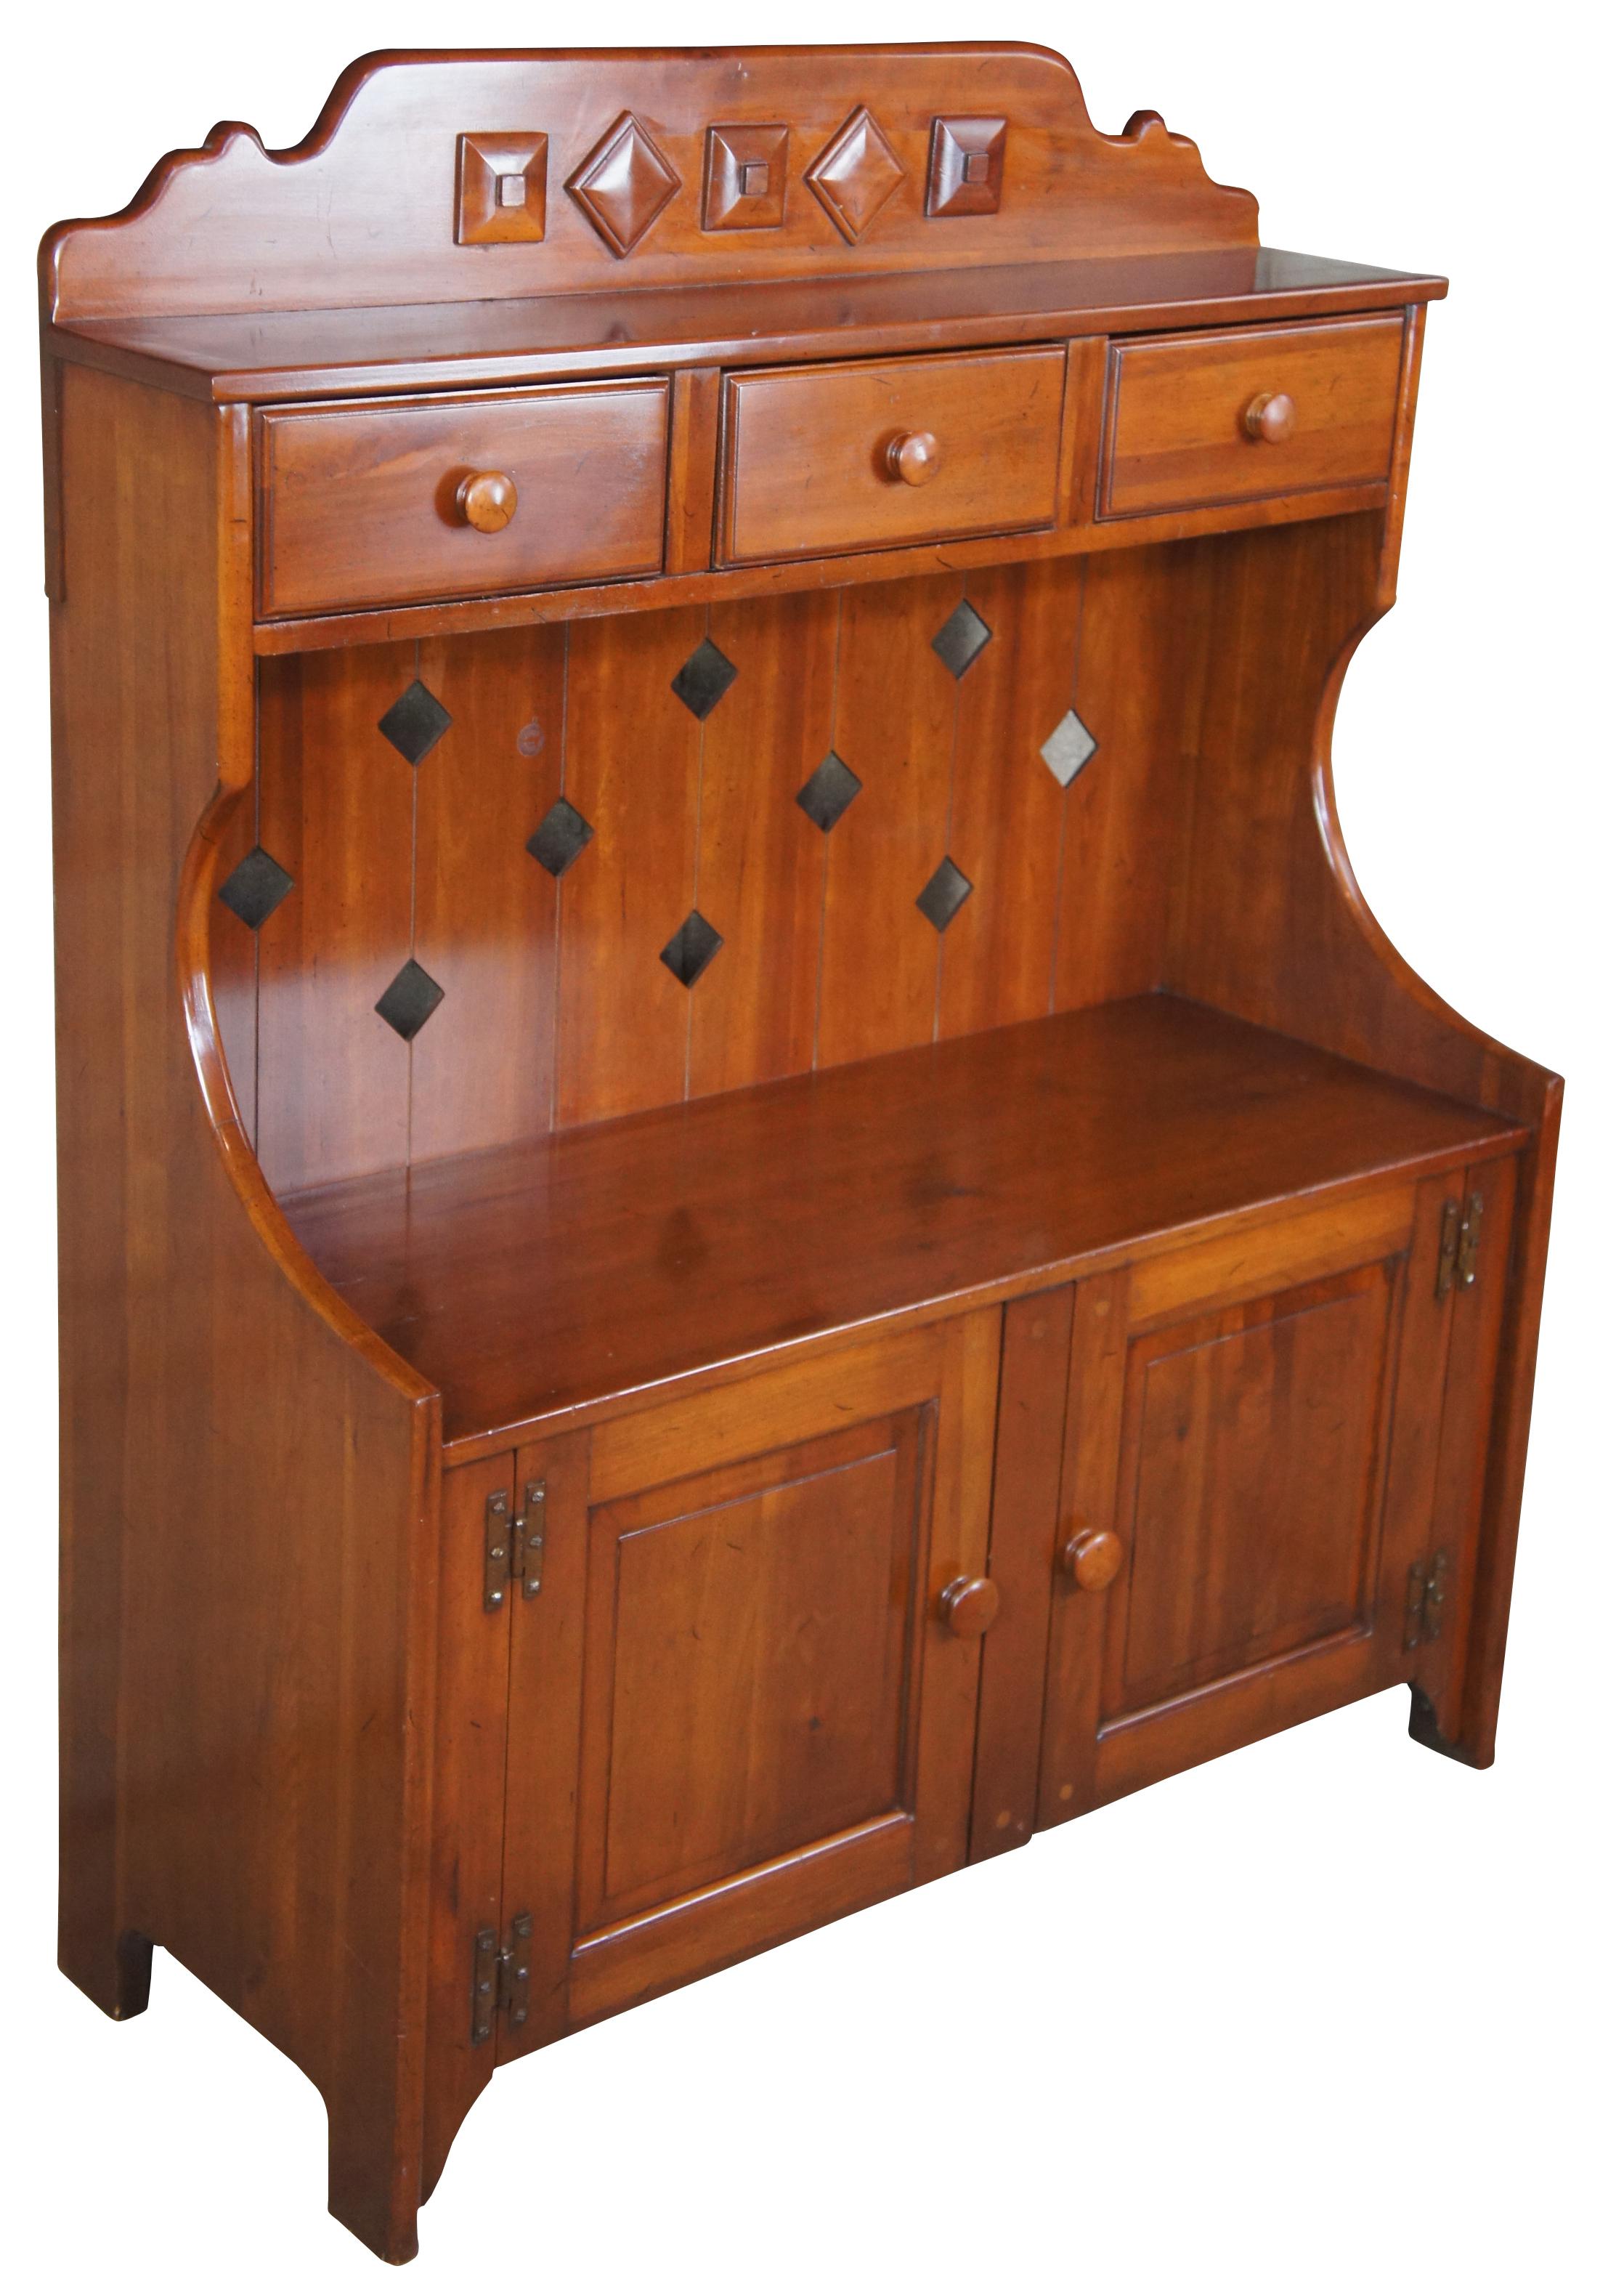 1959 Franklin Shockey hand burnished pine dry sink or bucket bench. Made from pine, with three drawers and lower cabinet. Features diamond cutout along back and shaped carving on the upper back splash. Marked Franklin Shockey along the back,